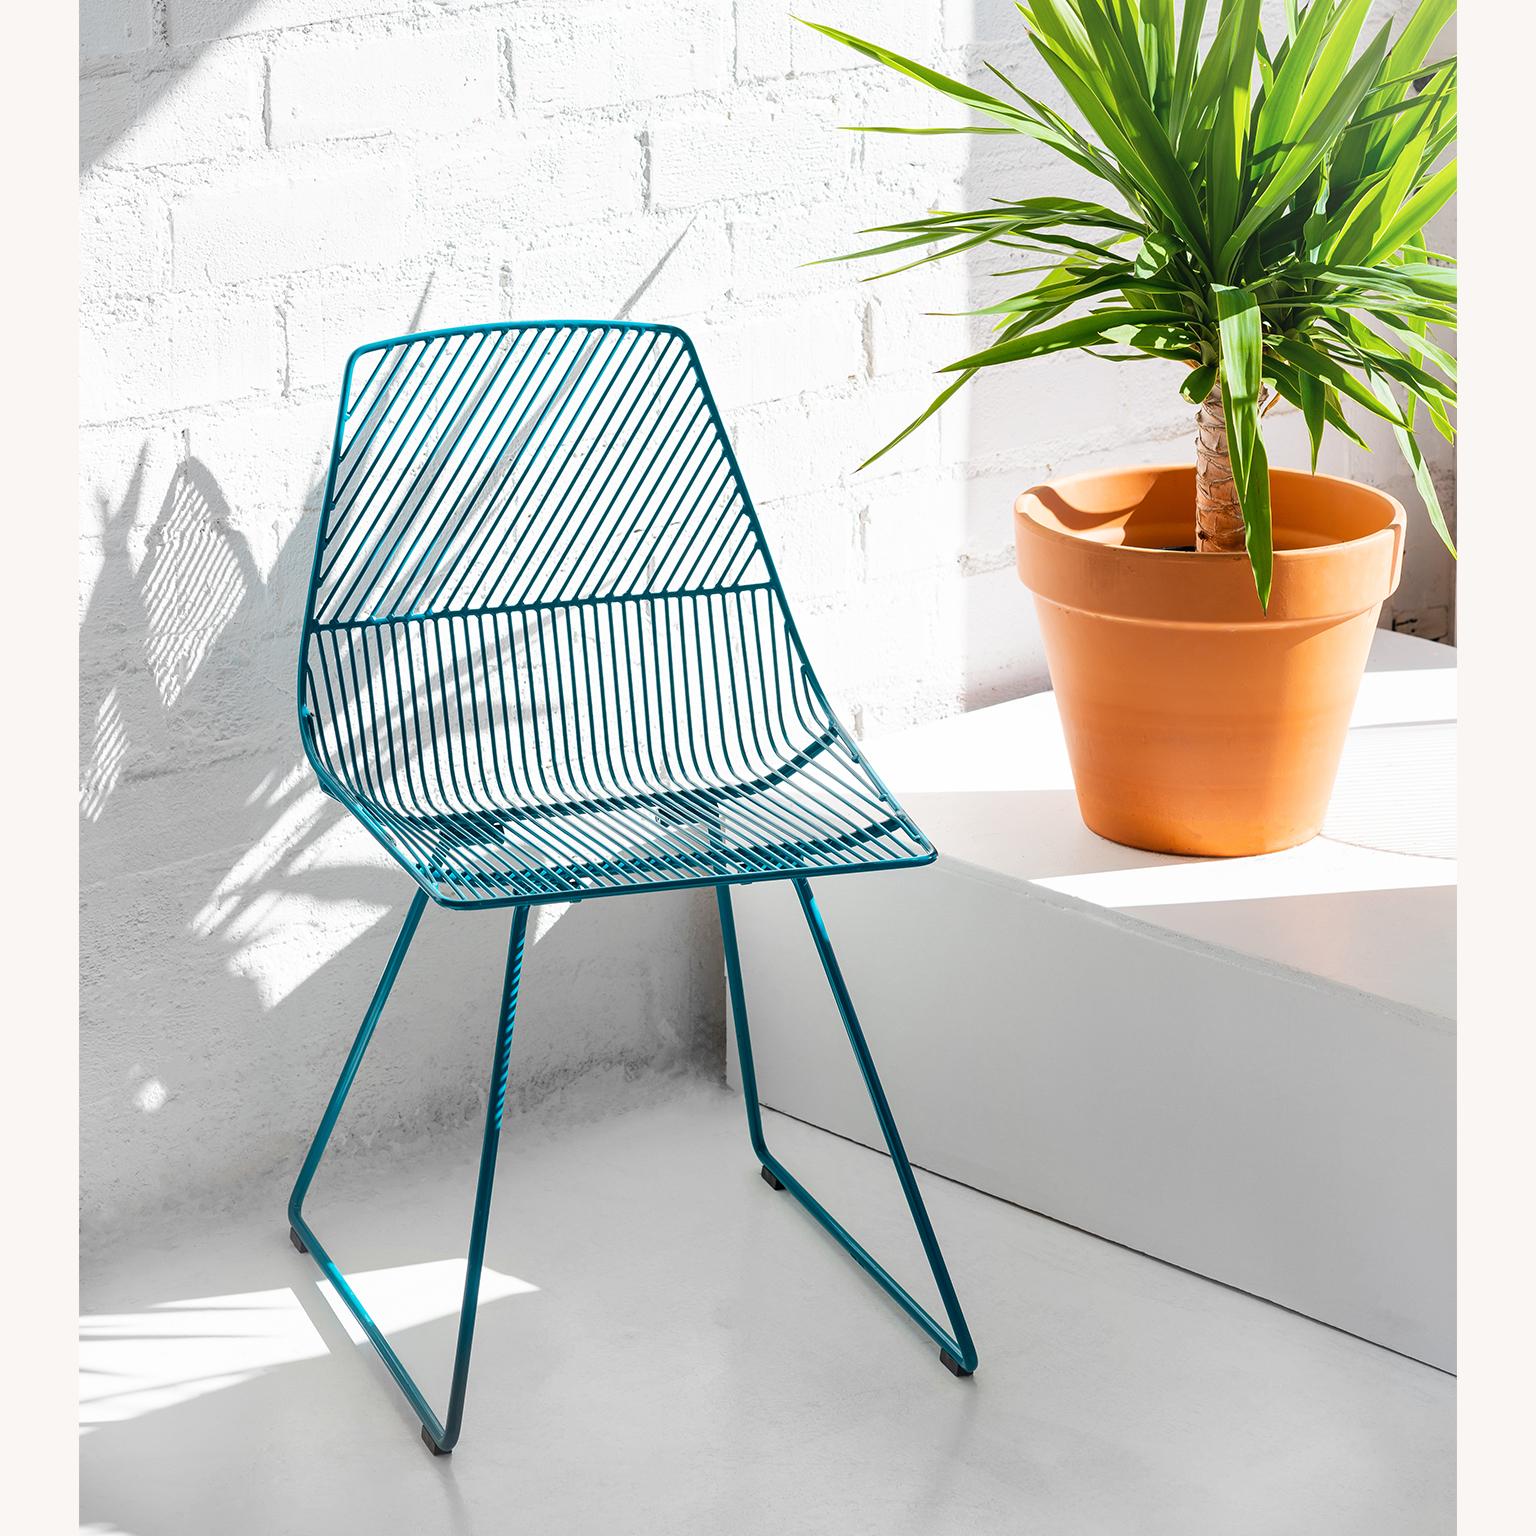 Galvanized Modern Minimalist Side Chair, Ethel Chair in Peacock Blue by Bend Goods